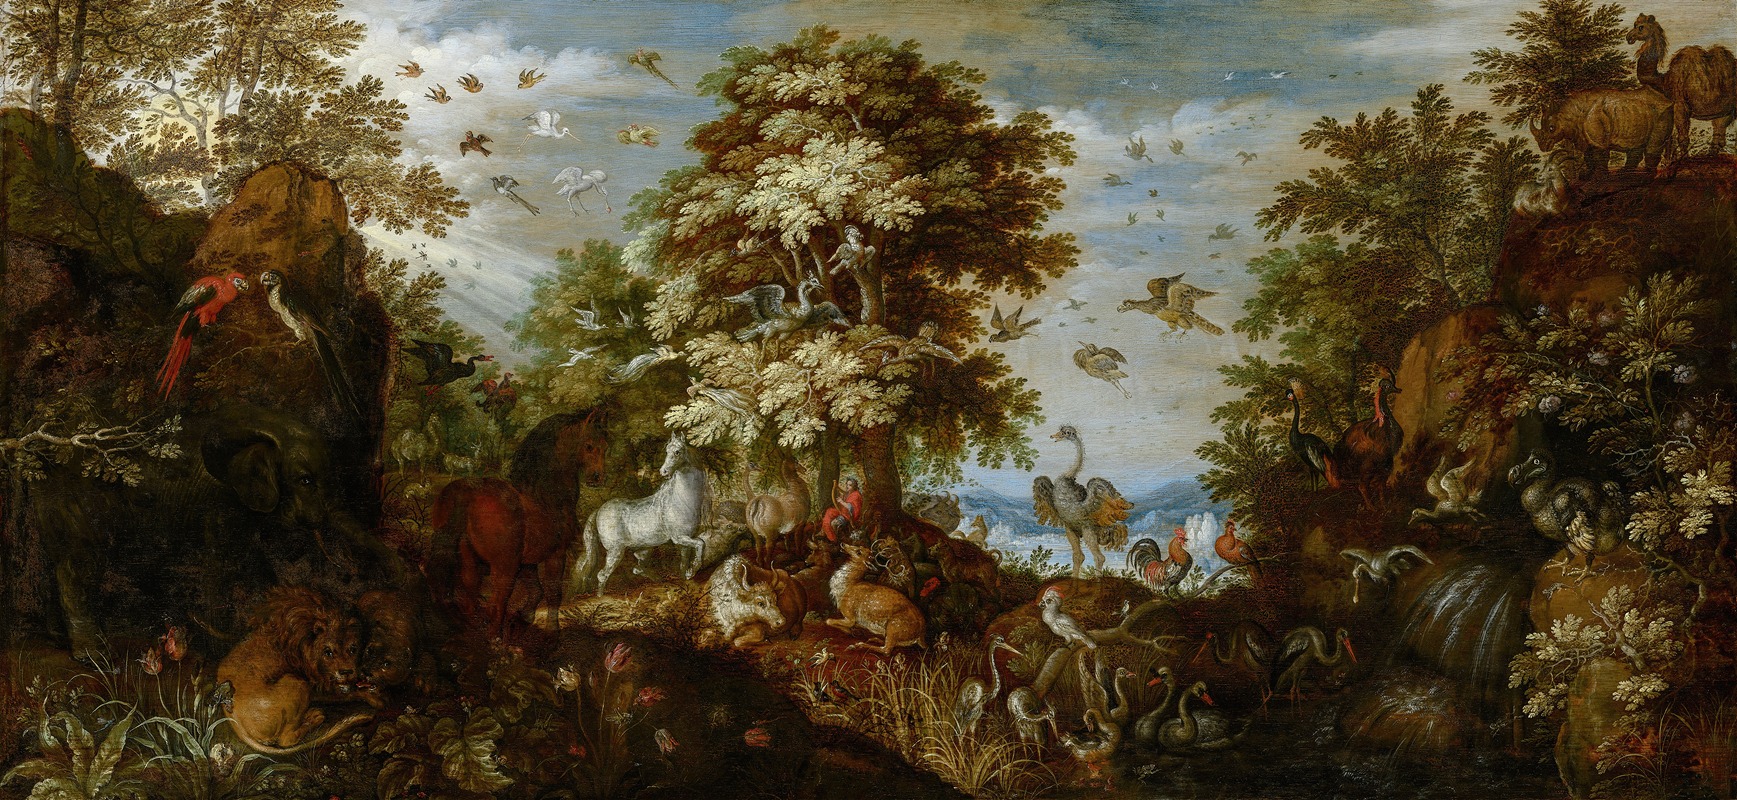 Roelant Savery - Orpheus Charming the Animals with his Music